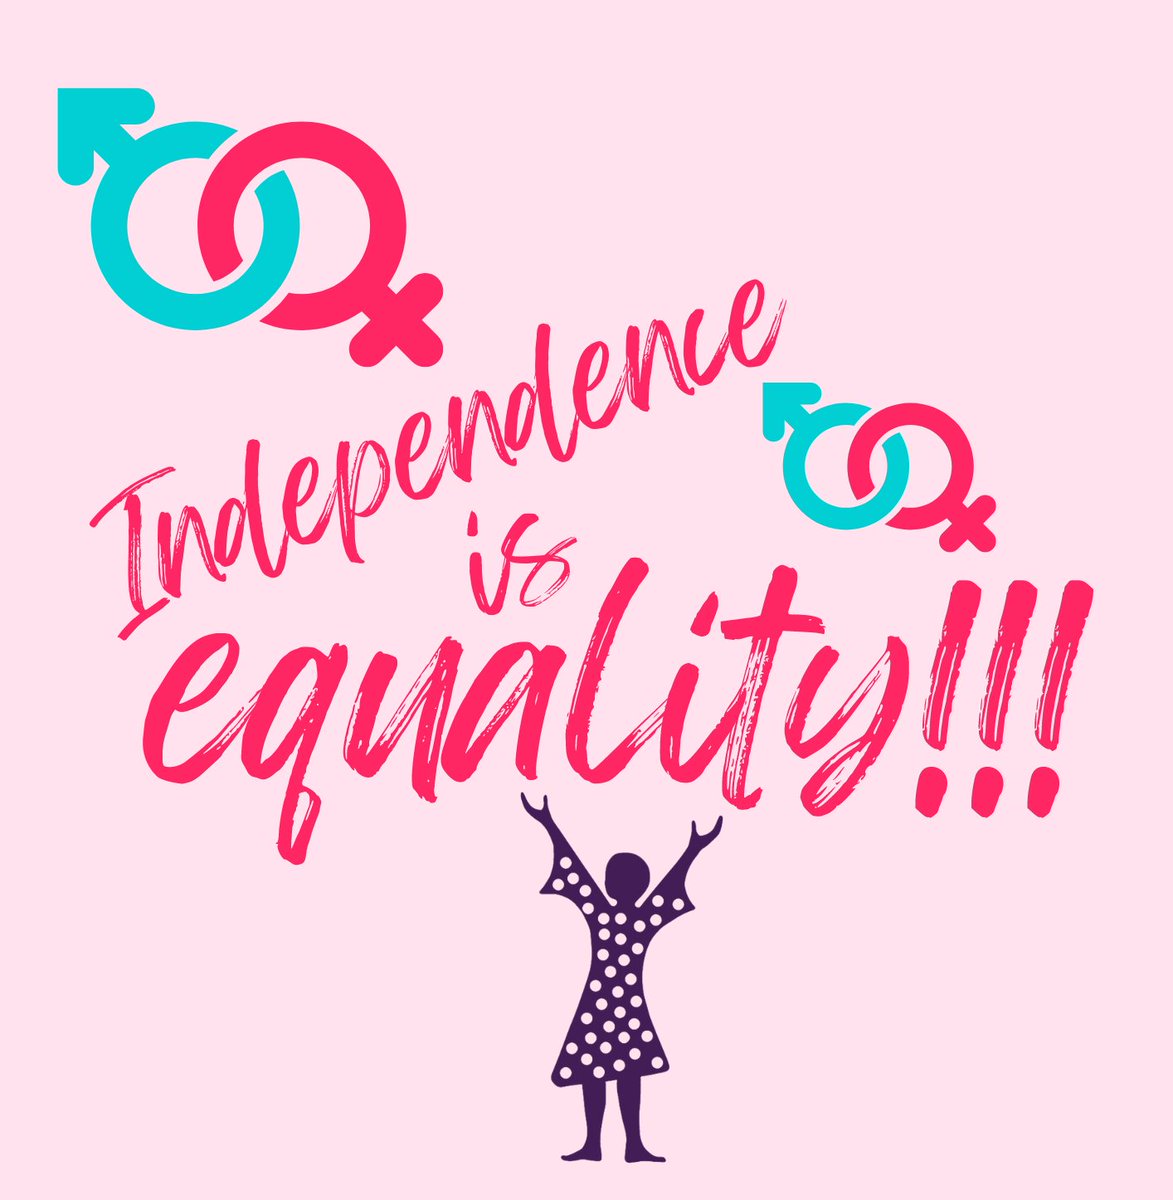 Independence Day holds a special significance for women as it serves as a reminder of the struggles & achievements of those who fought for women’s rights & equality. Yet 44 years on, we are regressing on #womensrepresentation in corridors of power & leadership. #ZimbabweAt44